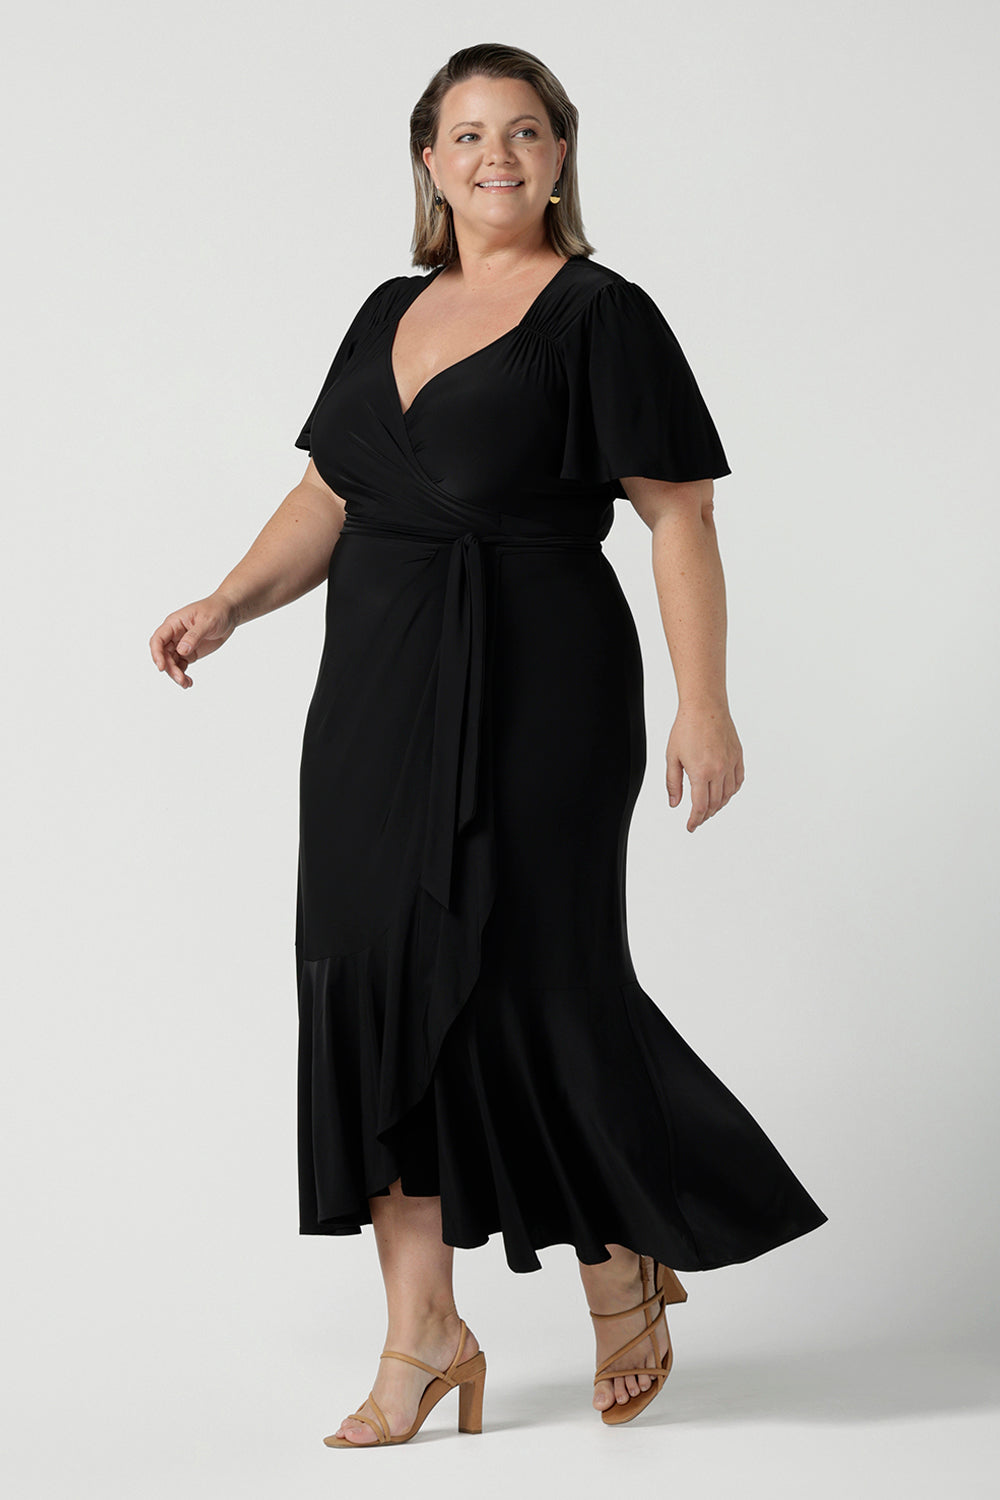 Size 18 woman wears a Alita dress in black. An elegant wrap dress with a tier and sweetheart neckline and flutter sleeve. Made in Australia for women size 8 - 24.